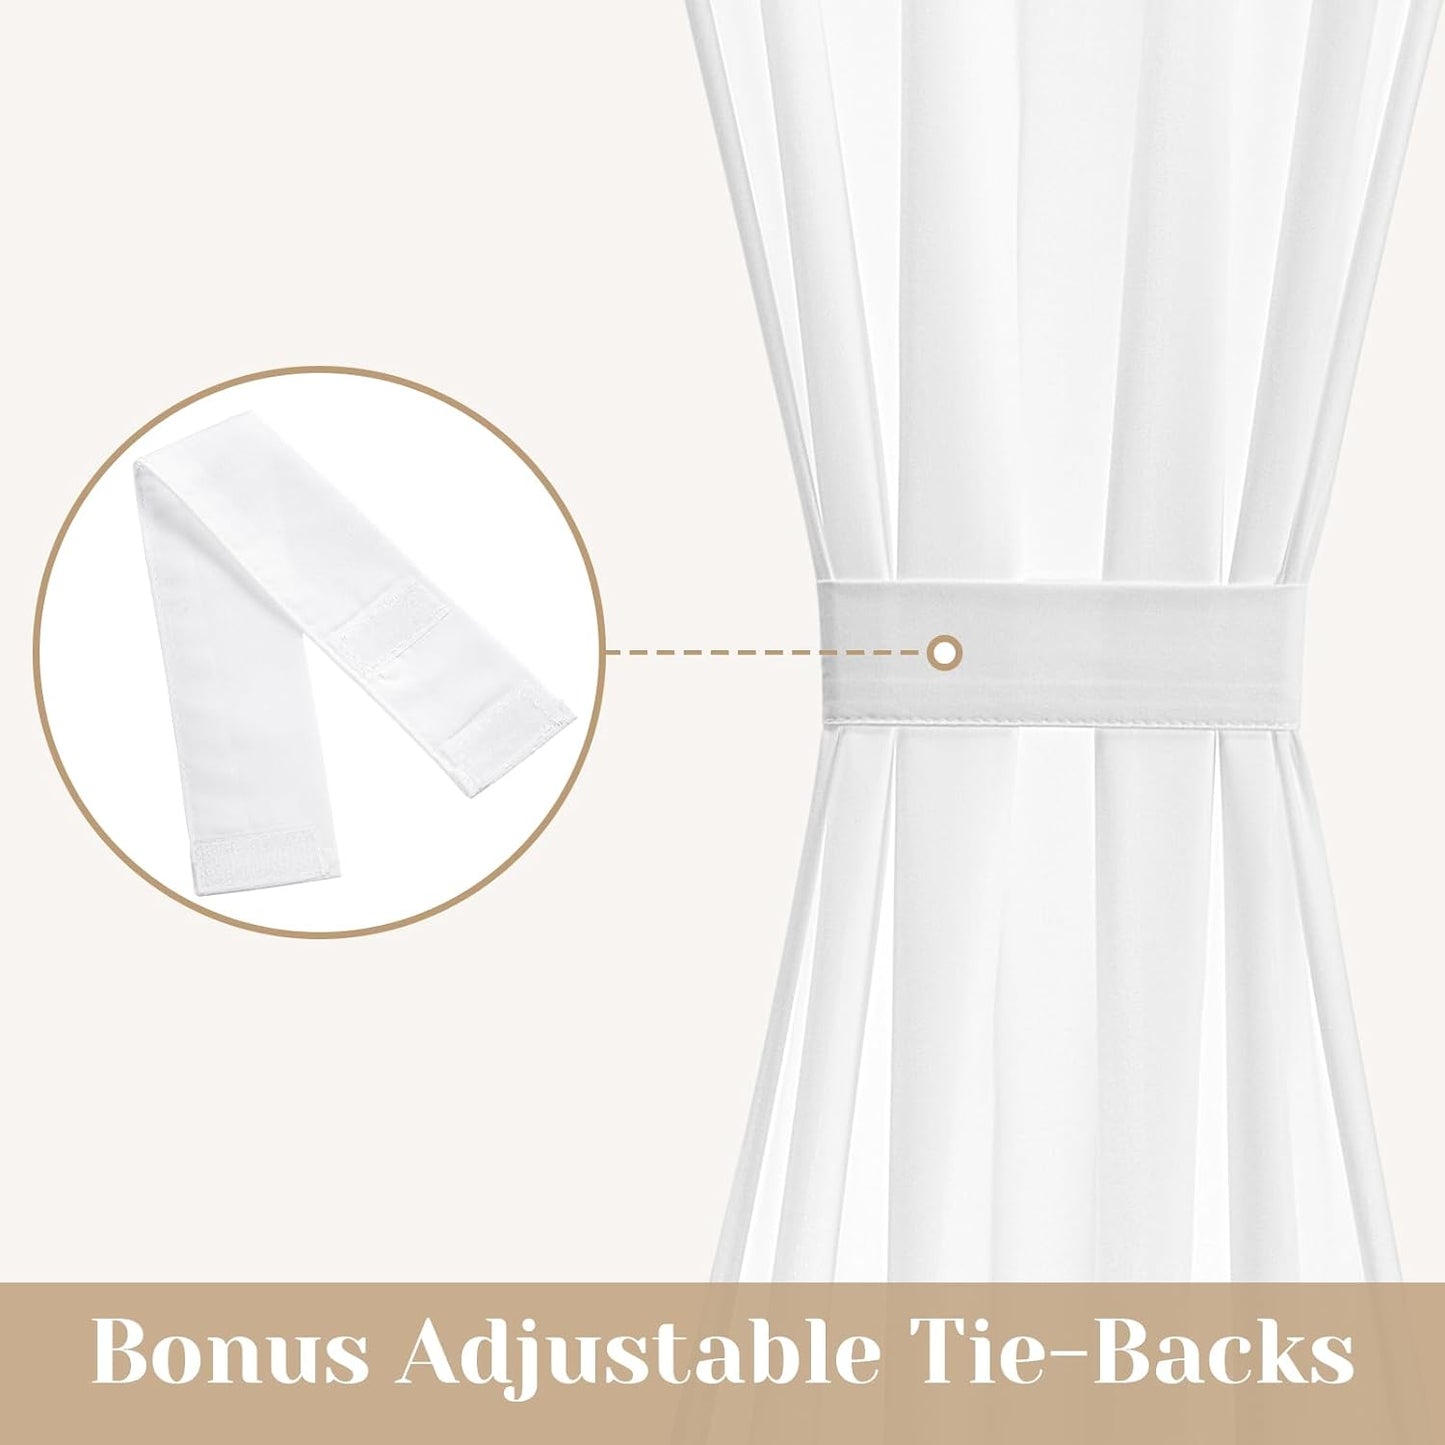 HOMEIDEAS Non-See-Through Sidelight Curtains for Front Door, Privacy Semi Sheer Door Window Curtains, Rod Pocket Light Filtering French Door Curtains with Tieback, (1 Panel, White, 26W X 72L)  HOMEIDEAS   